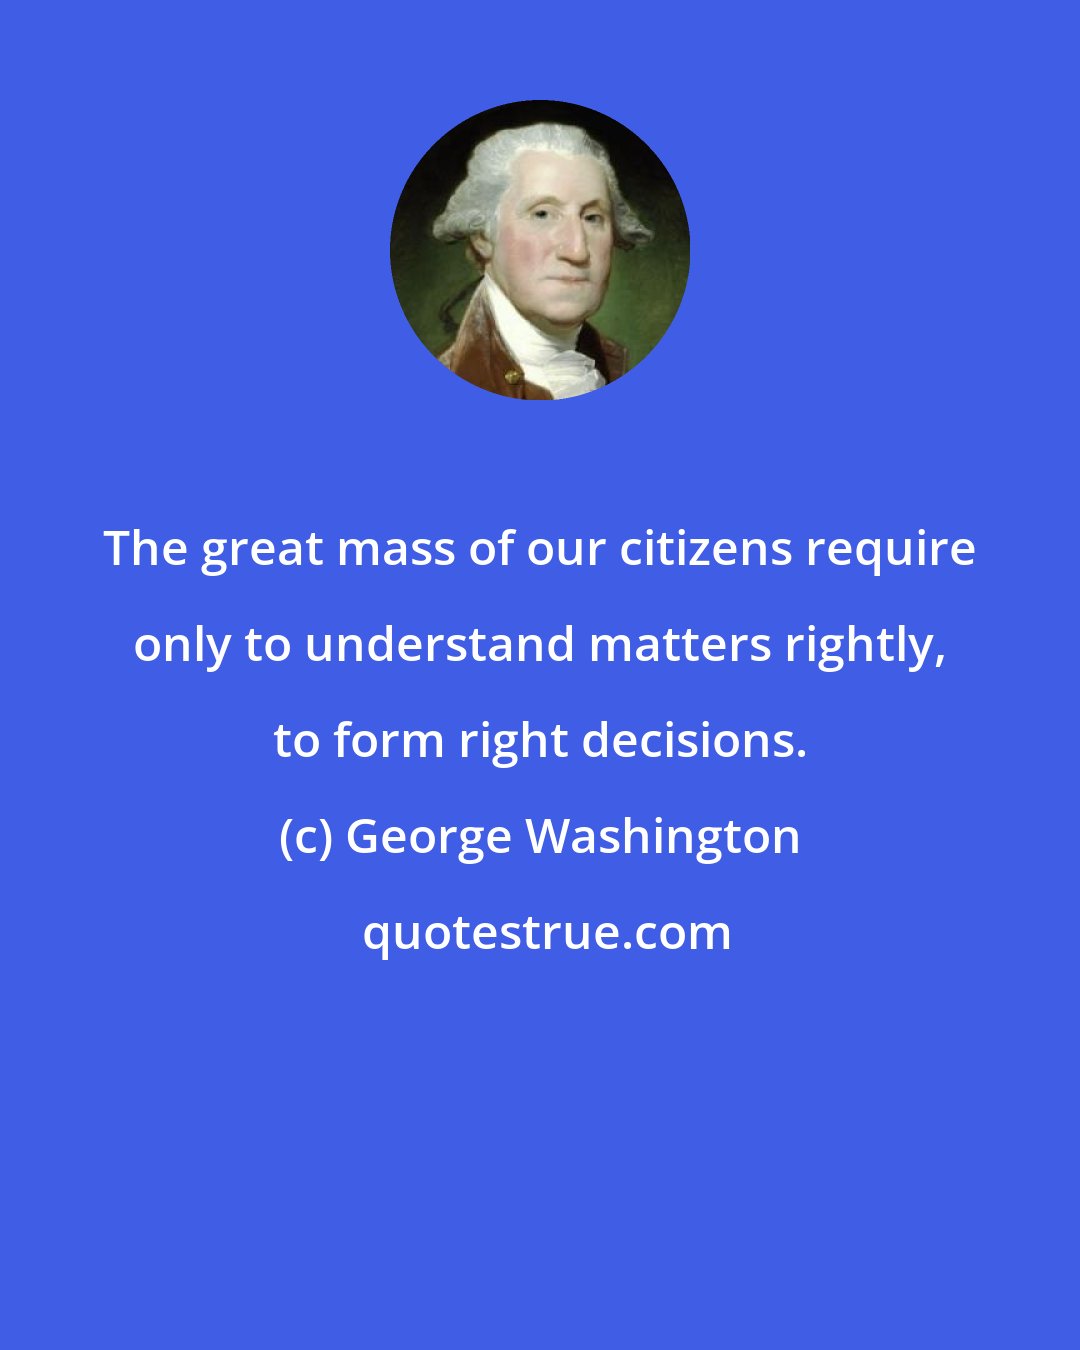 George Washington: The great mass of our citizens require only to understand matters rightly, to form right decisions.